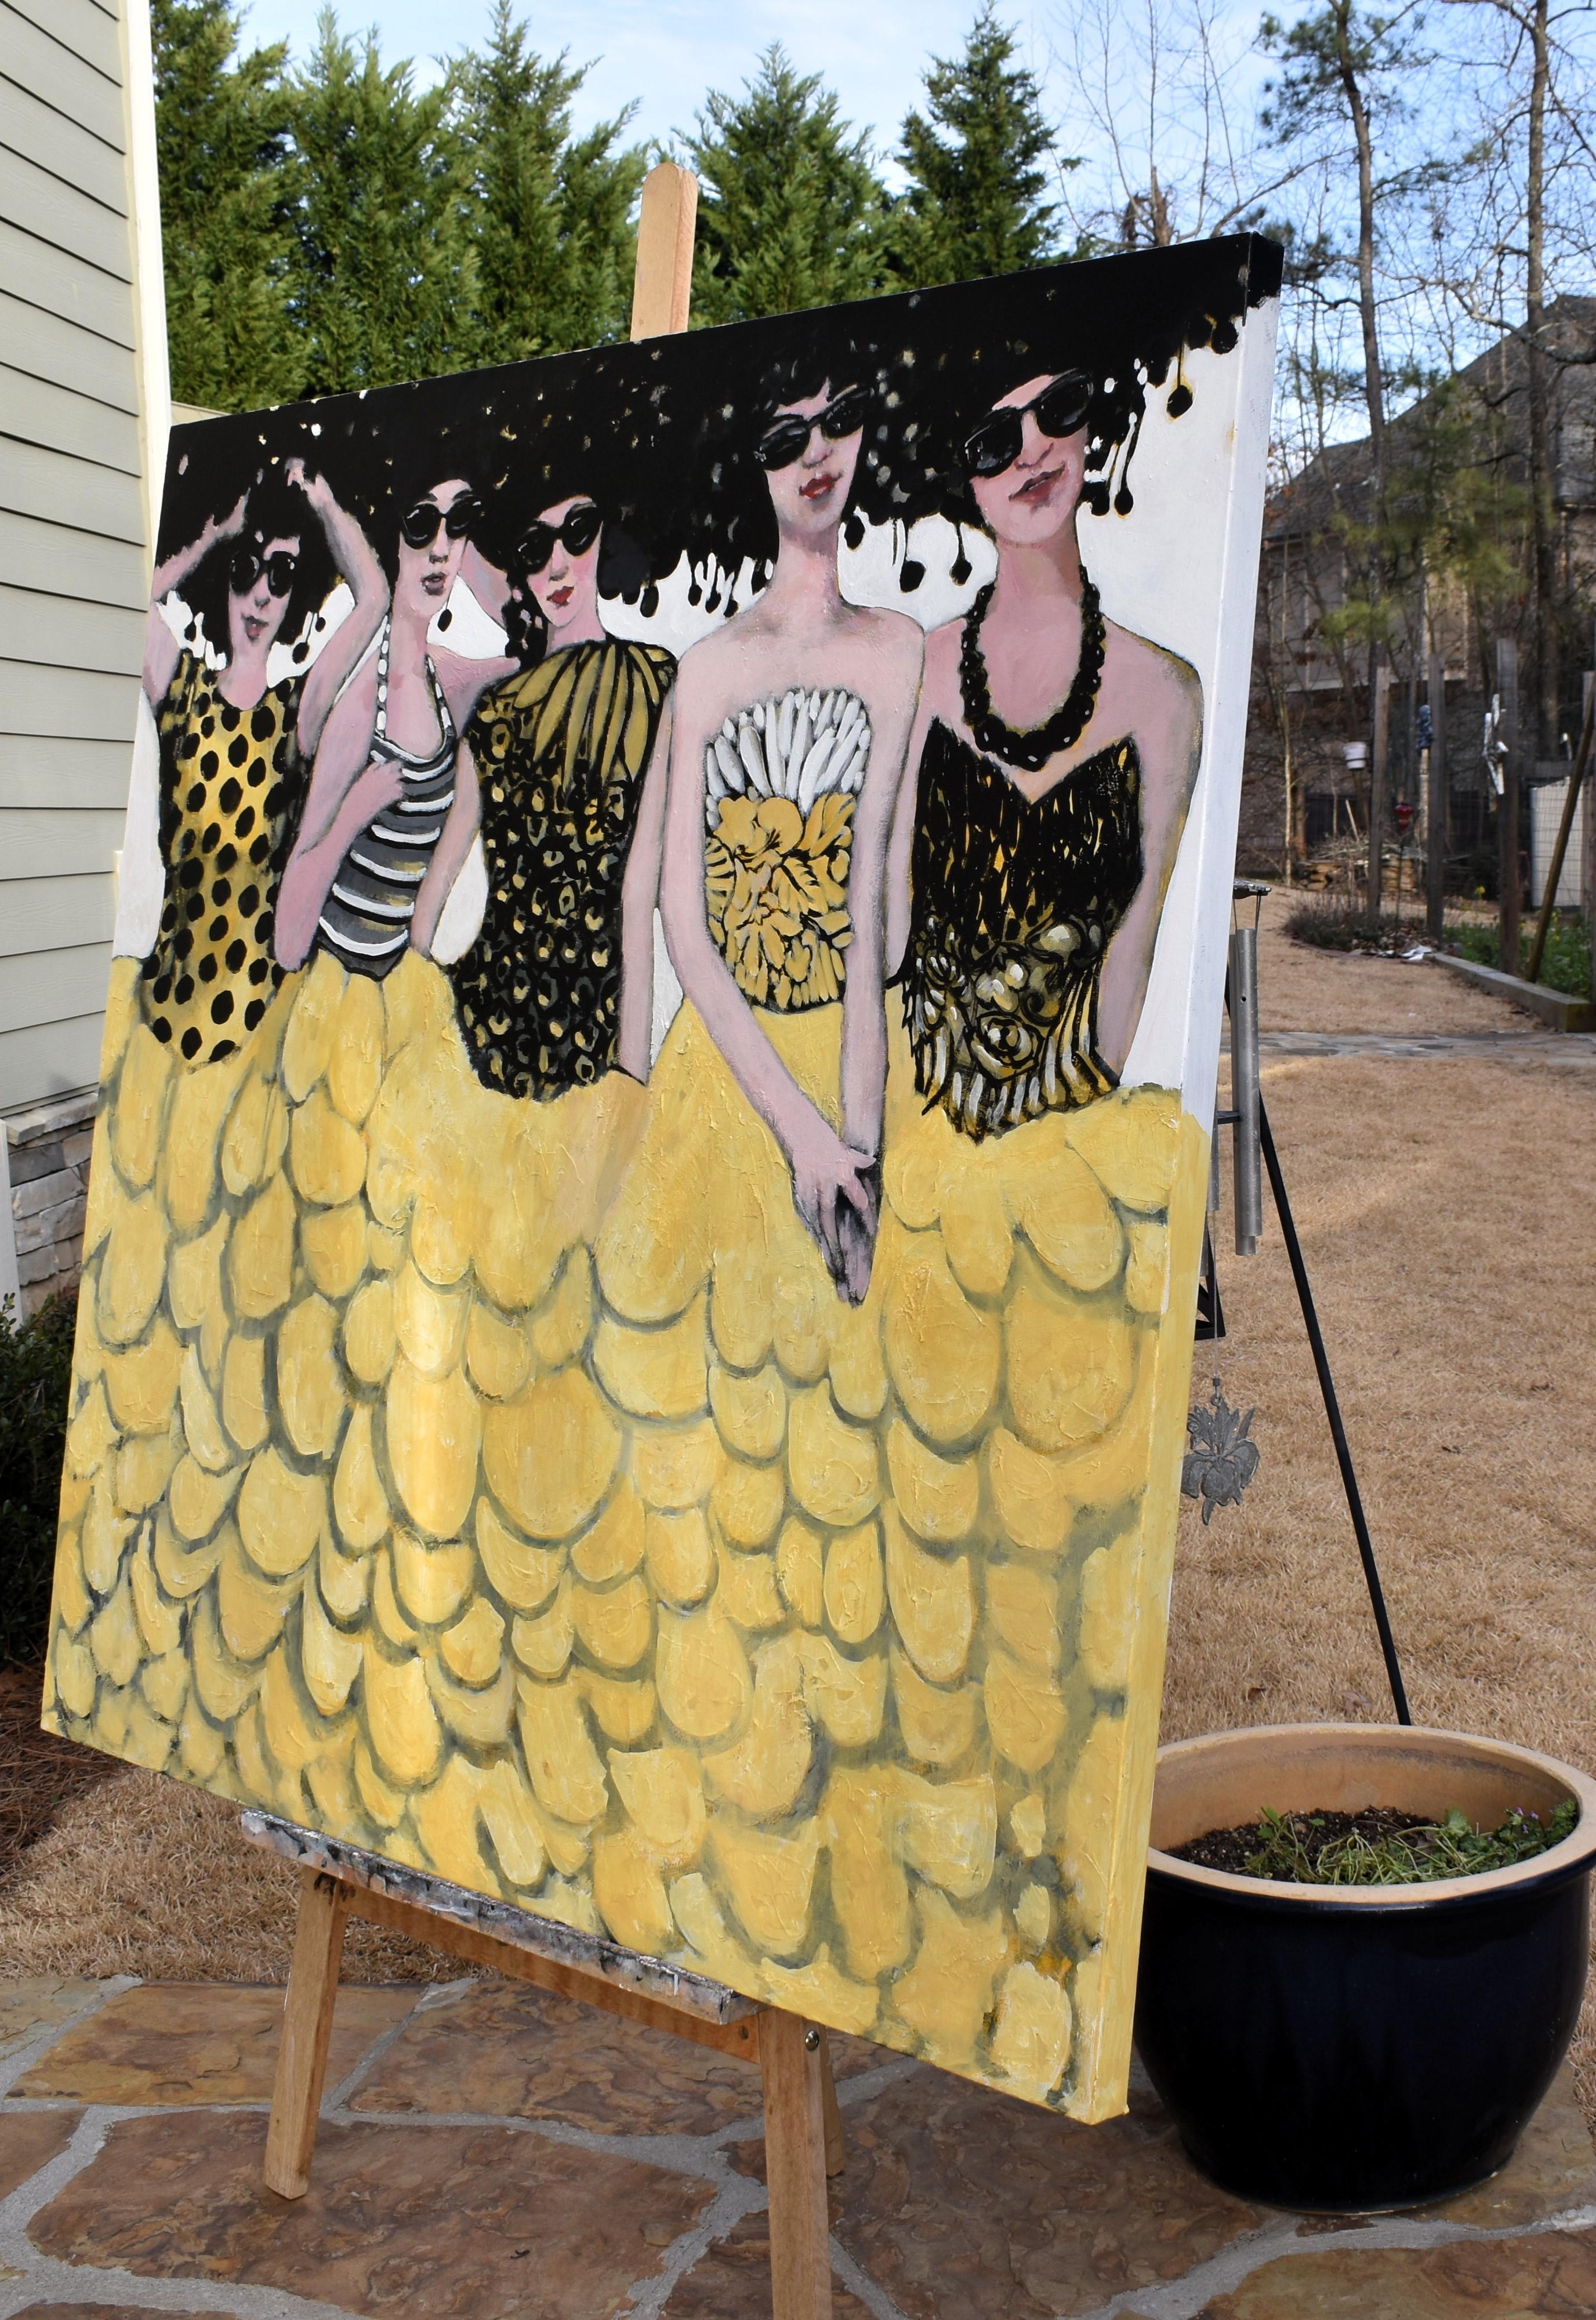 <p>Artist Comments<br>Five women gather together, each striking a unique pose in their continuous yellow scalloped skirt. Pompom-like shapes dangle from below their hair, complementing their outfits. Their close friendship is evident, strengthened